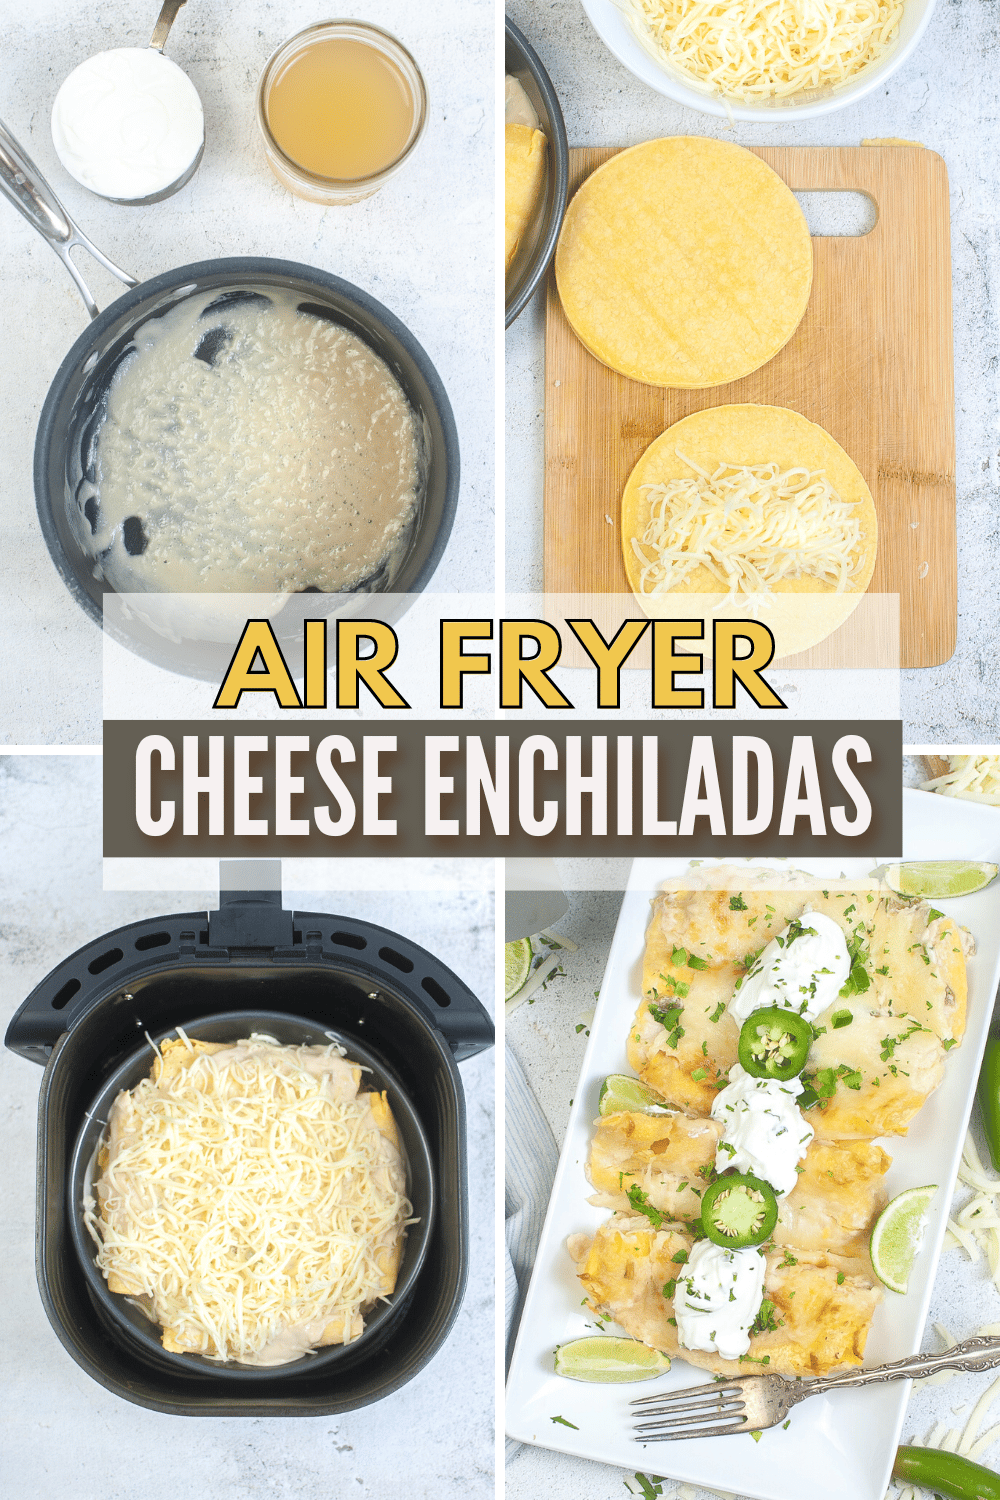 Air Fryer Cheese Enchiladas are a delicious and easy way to make a classic Mexican dish. Serve with your favorite toppings and enjoy! #airfryer #cheeseenchiladas #enchiladas #mexicanfood via @wondermomwannab